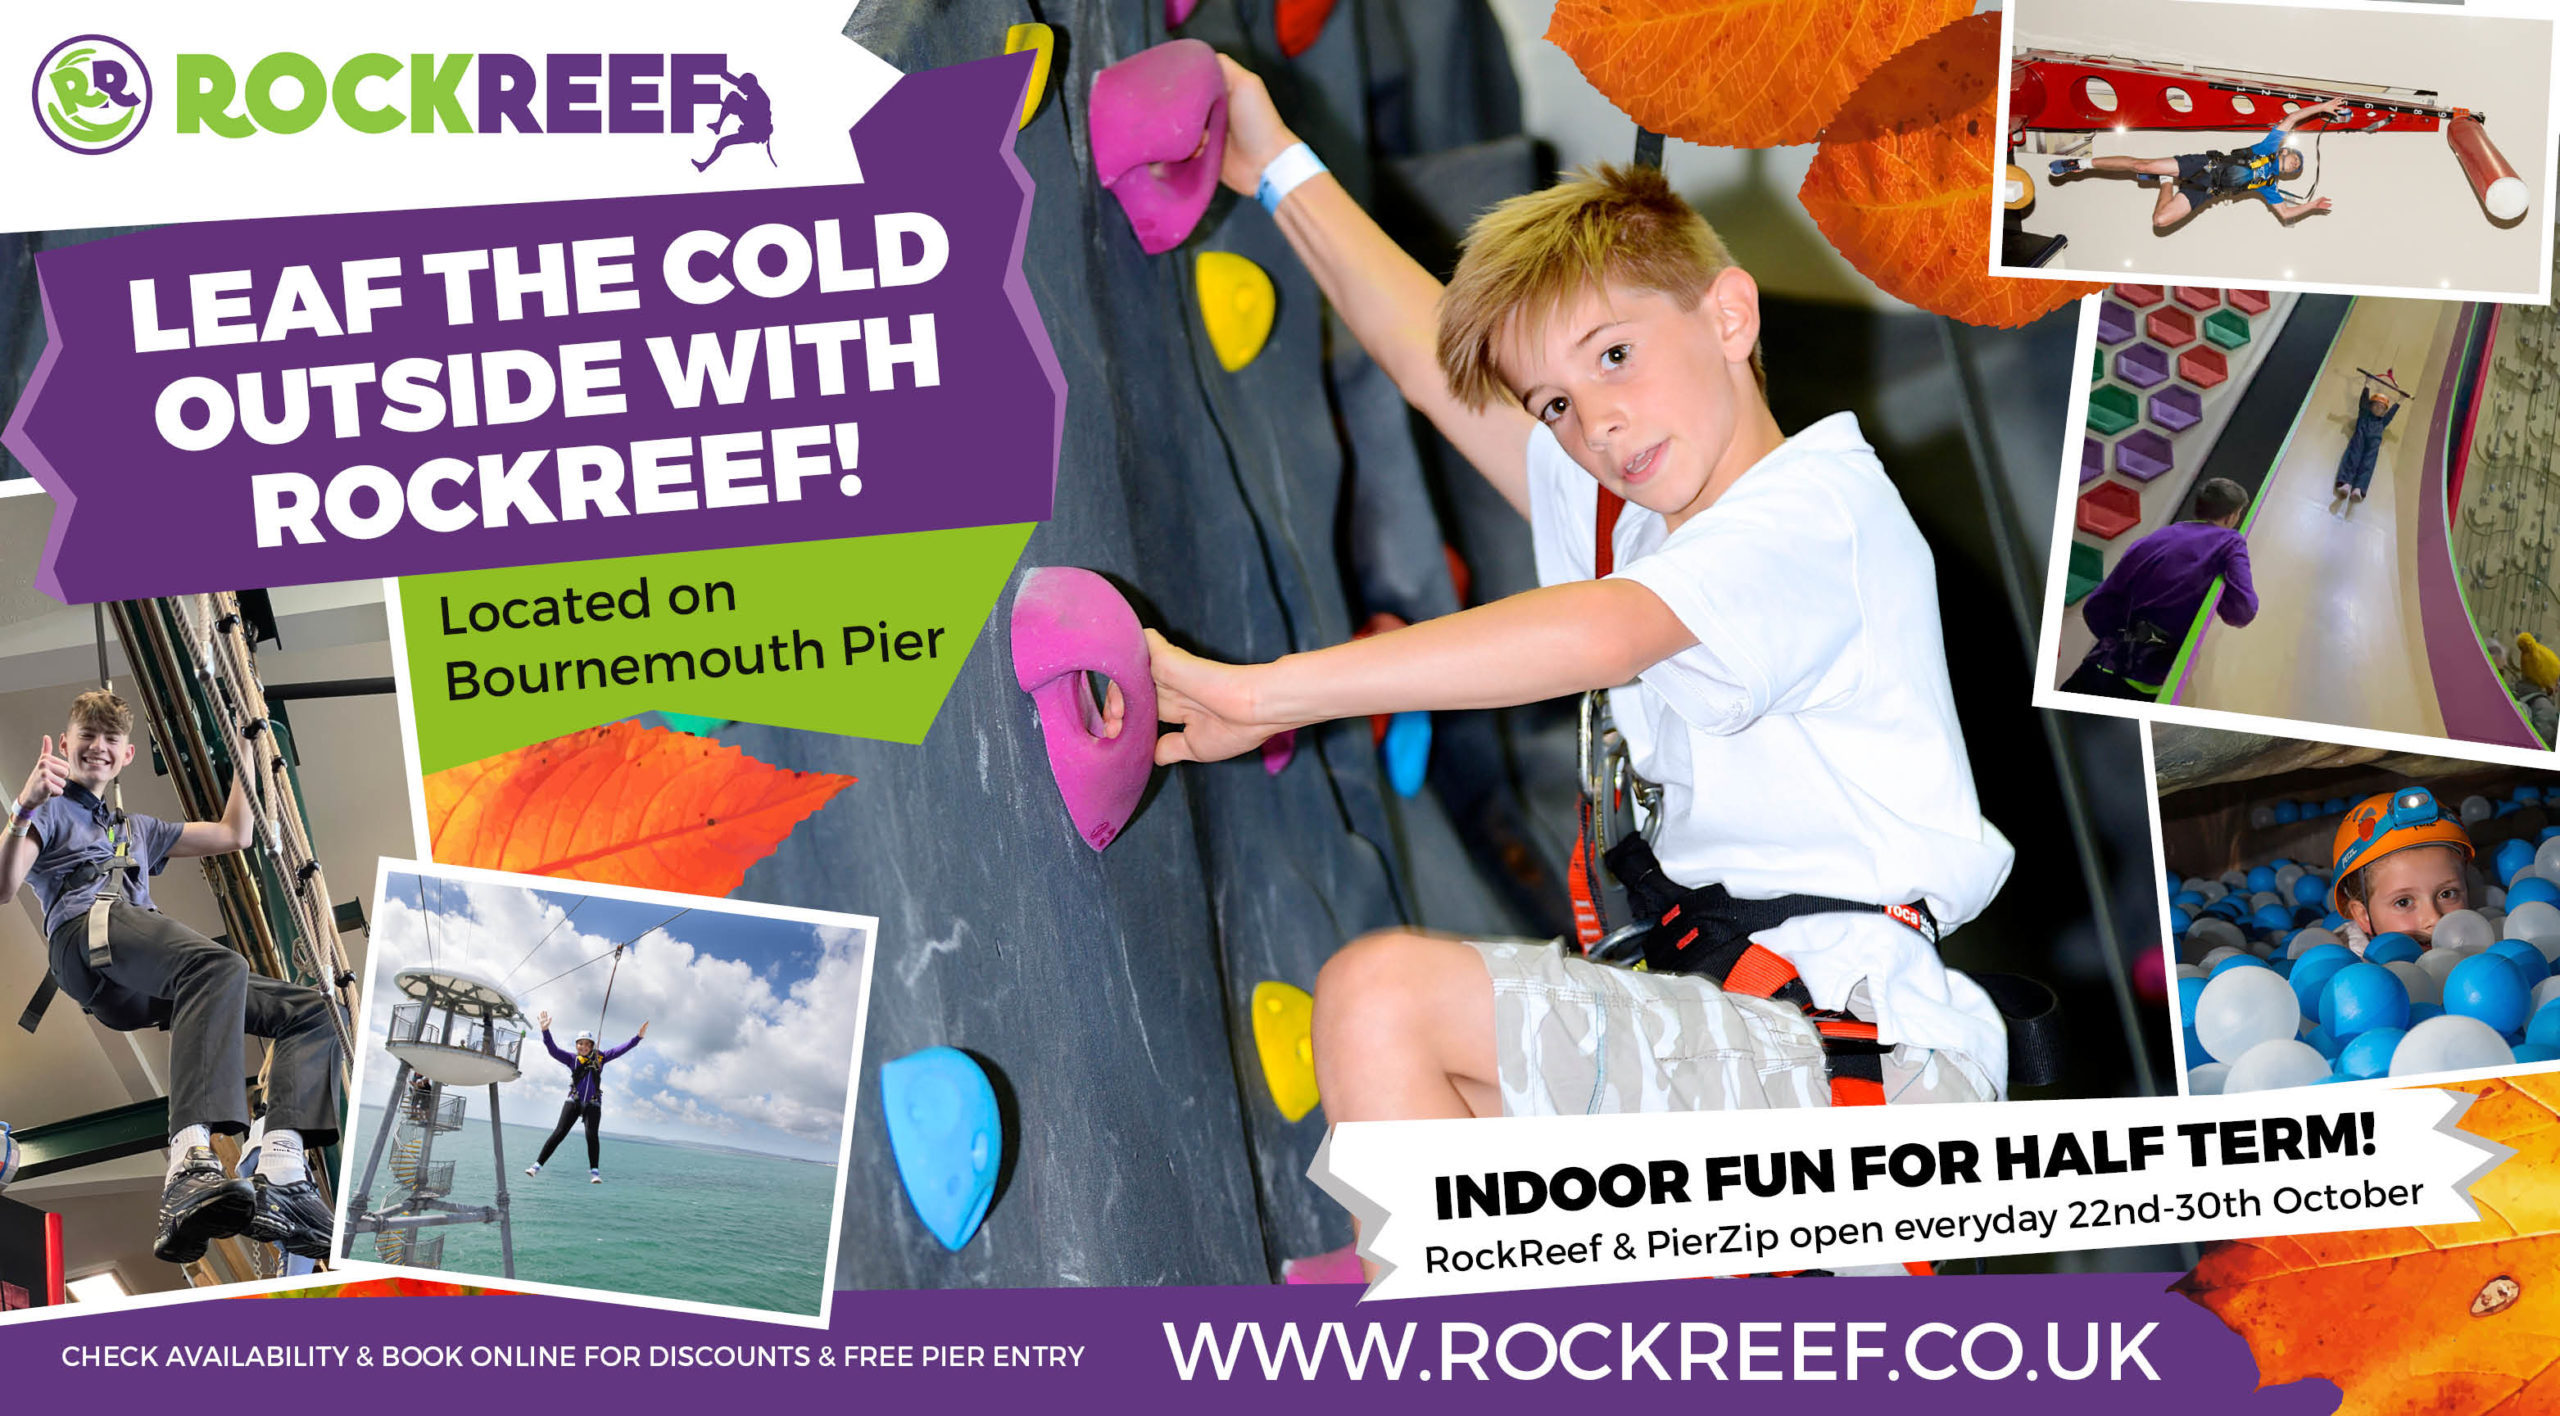 Indoor Fun for all the family at RockReef this October Half Term